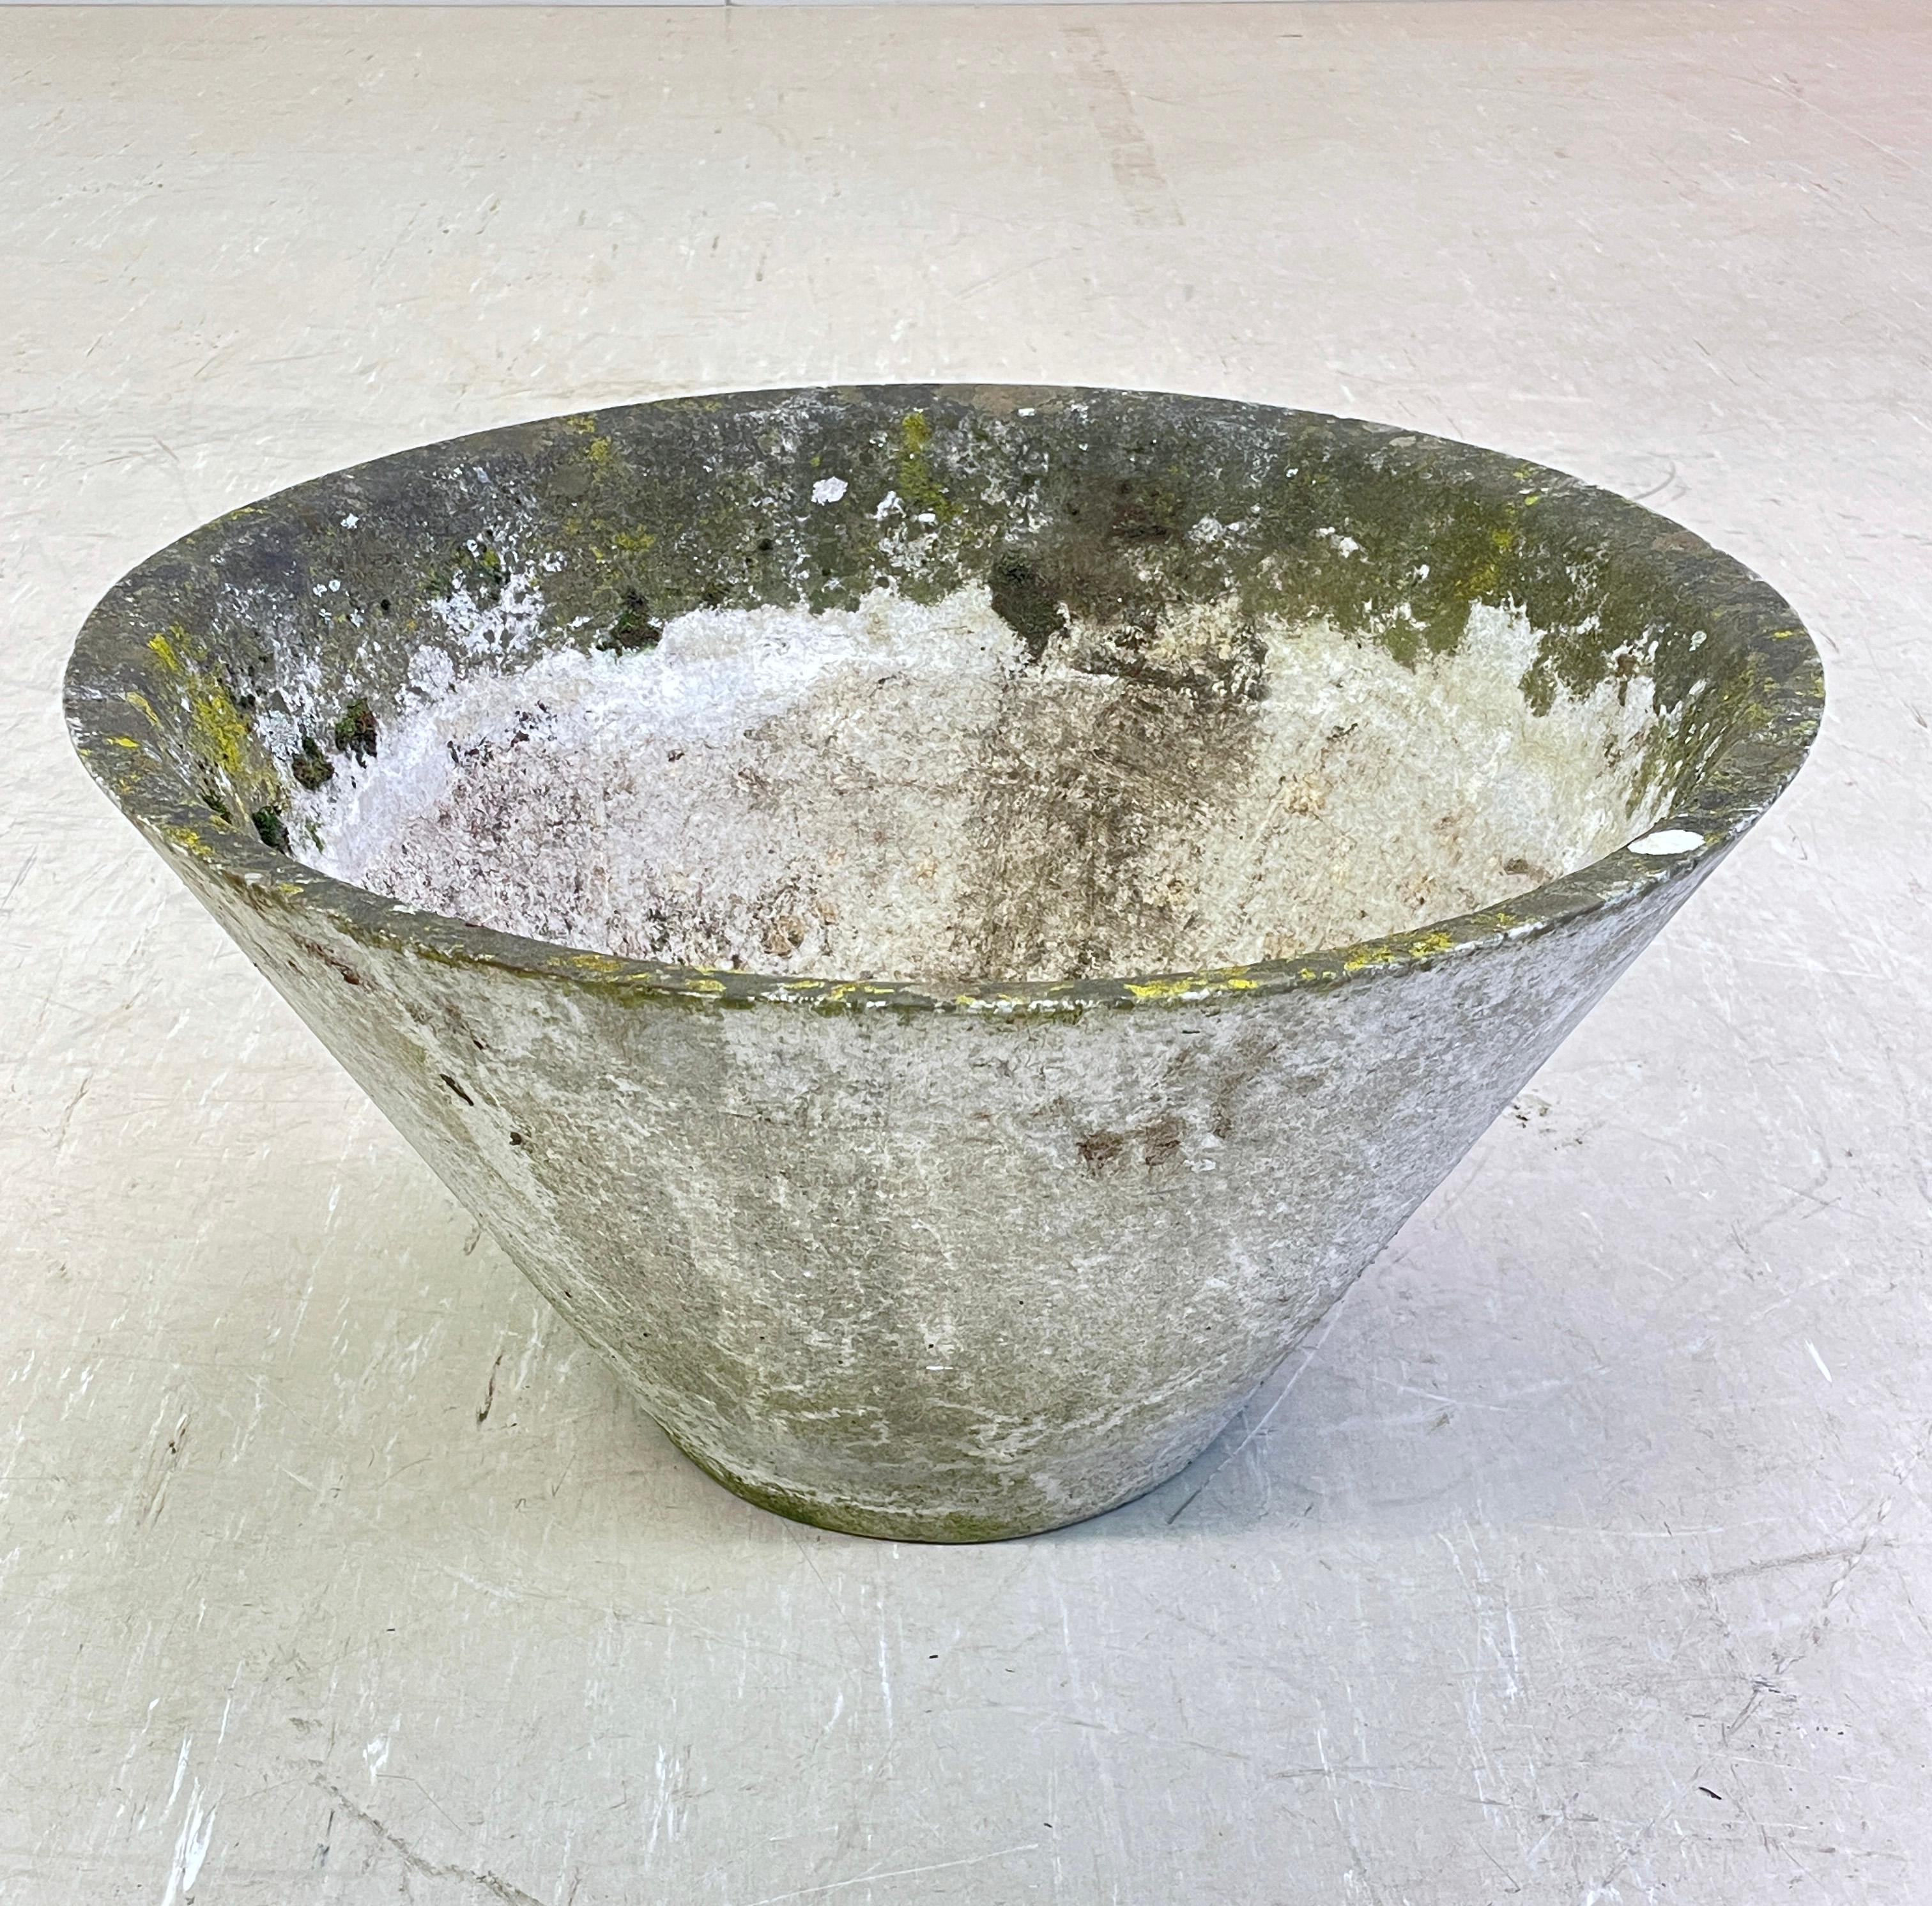 Monumental concrete planter by Swiss furniture designer, Willy Guhl. Solid concrete construction. Made in Switzerland 1960 - 1970. Produced by Eternit AG.  Conical form with drainage holes in base. In original condition with nice patination achieved